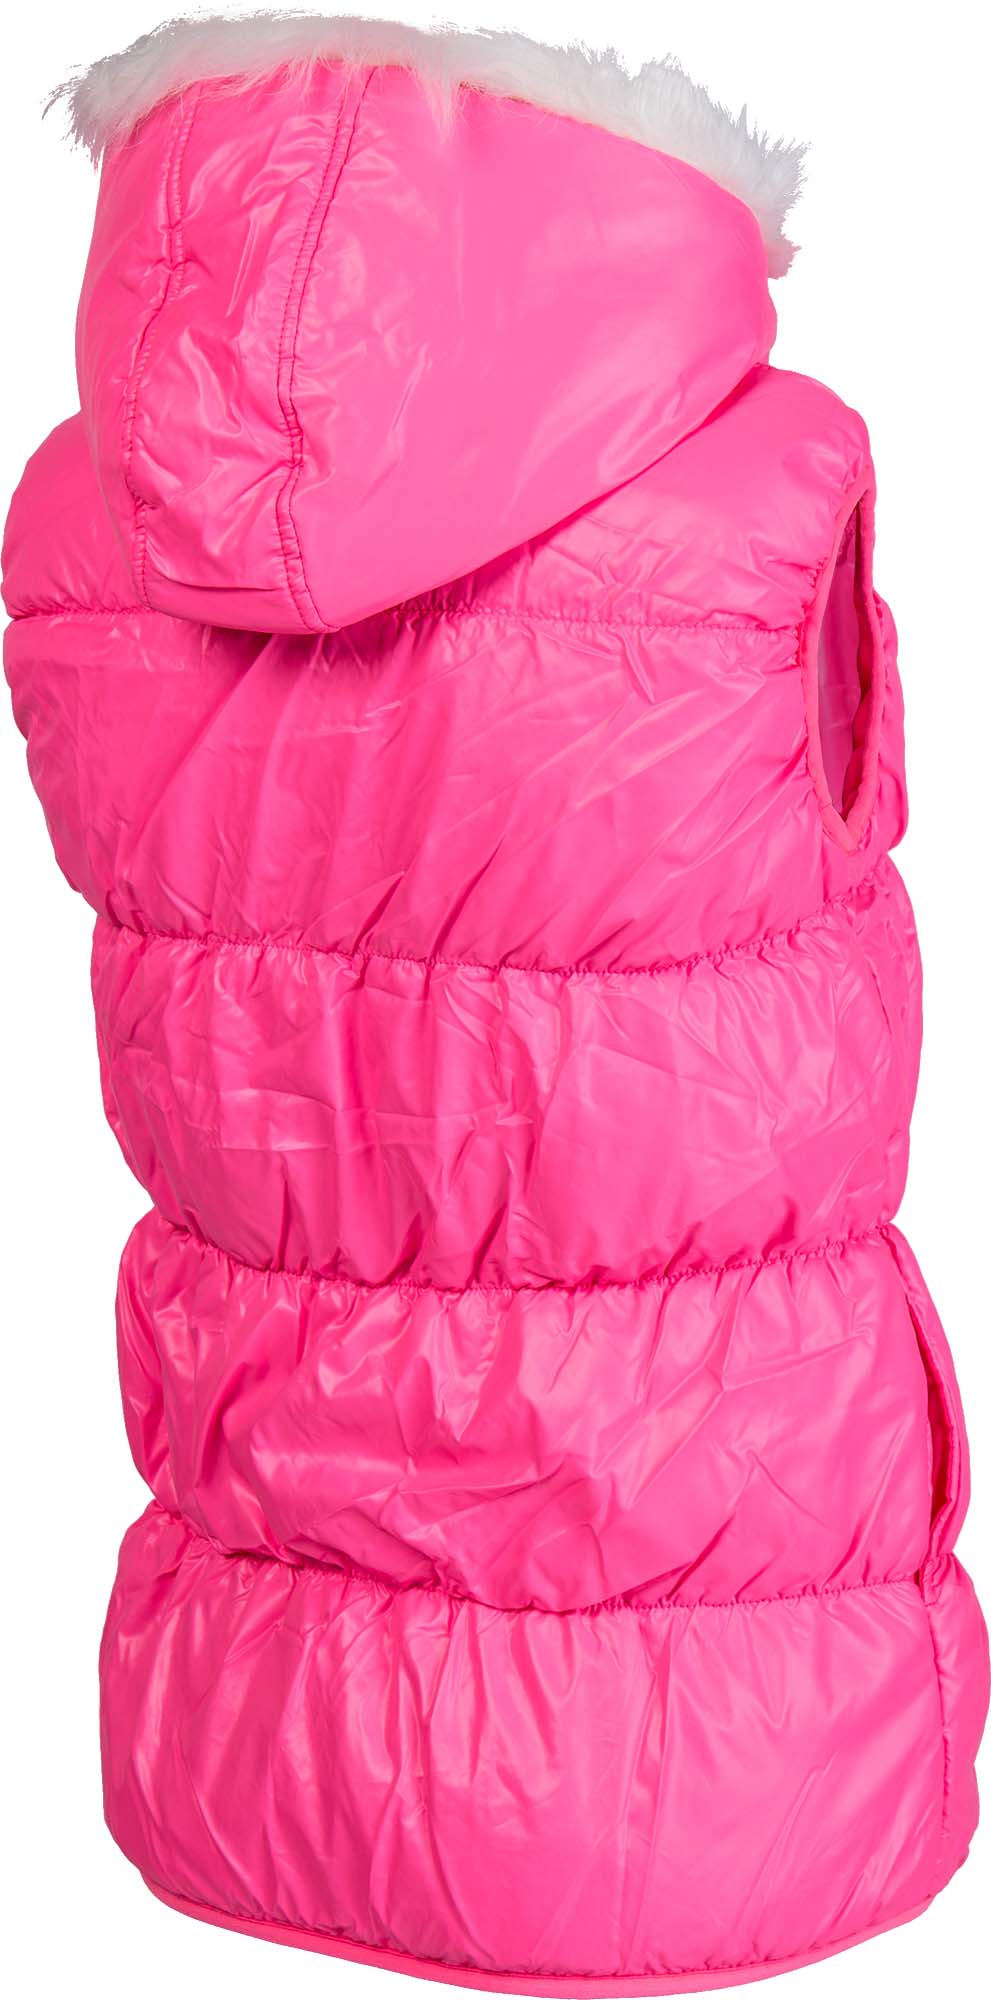 Girls’ quilted vest